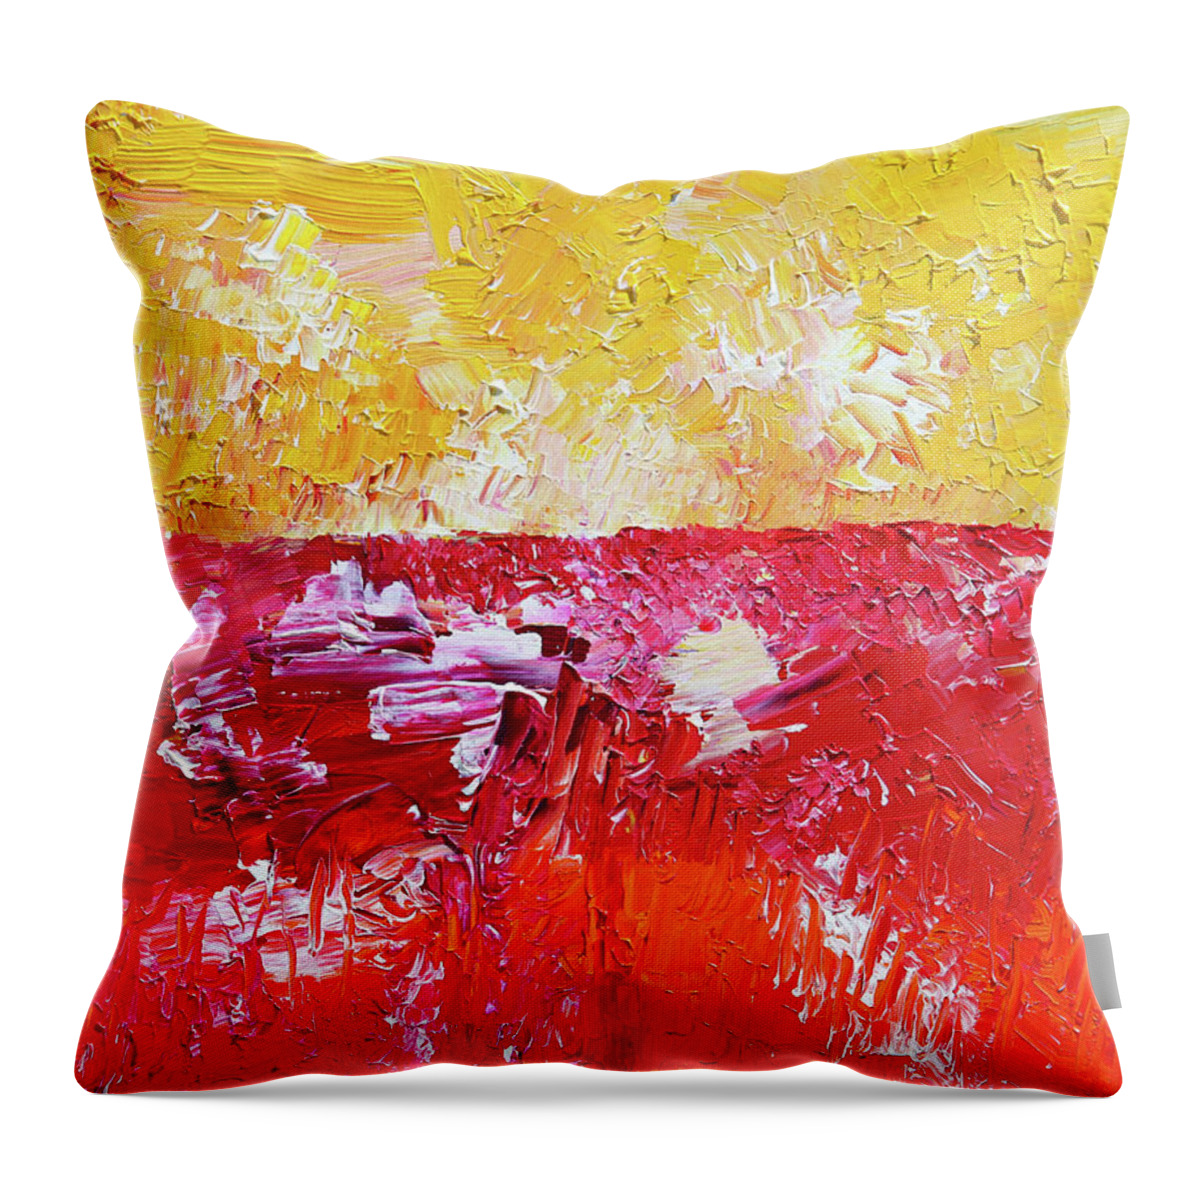 Fusionart Throw Pillow featuring the painting Sunrise by Ralph White